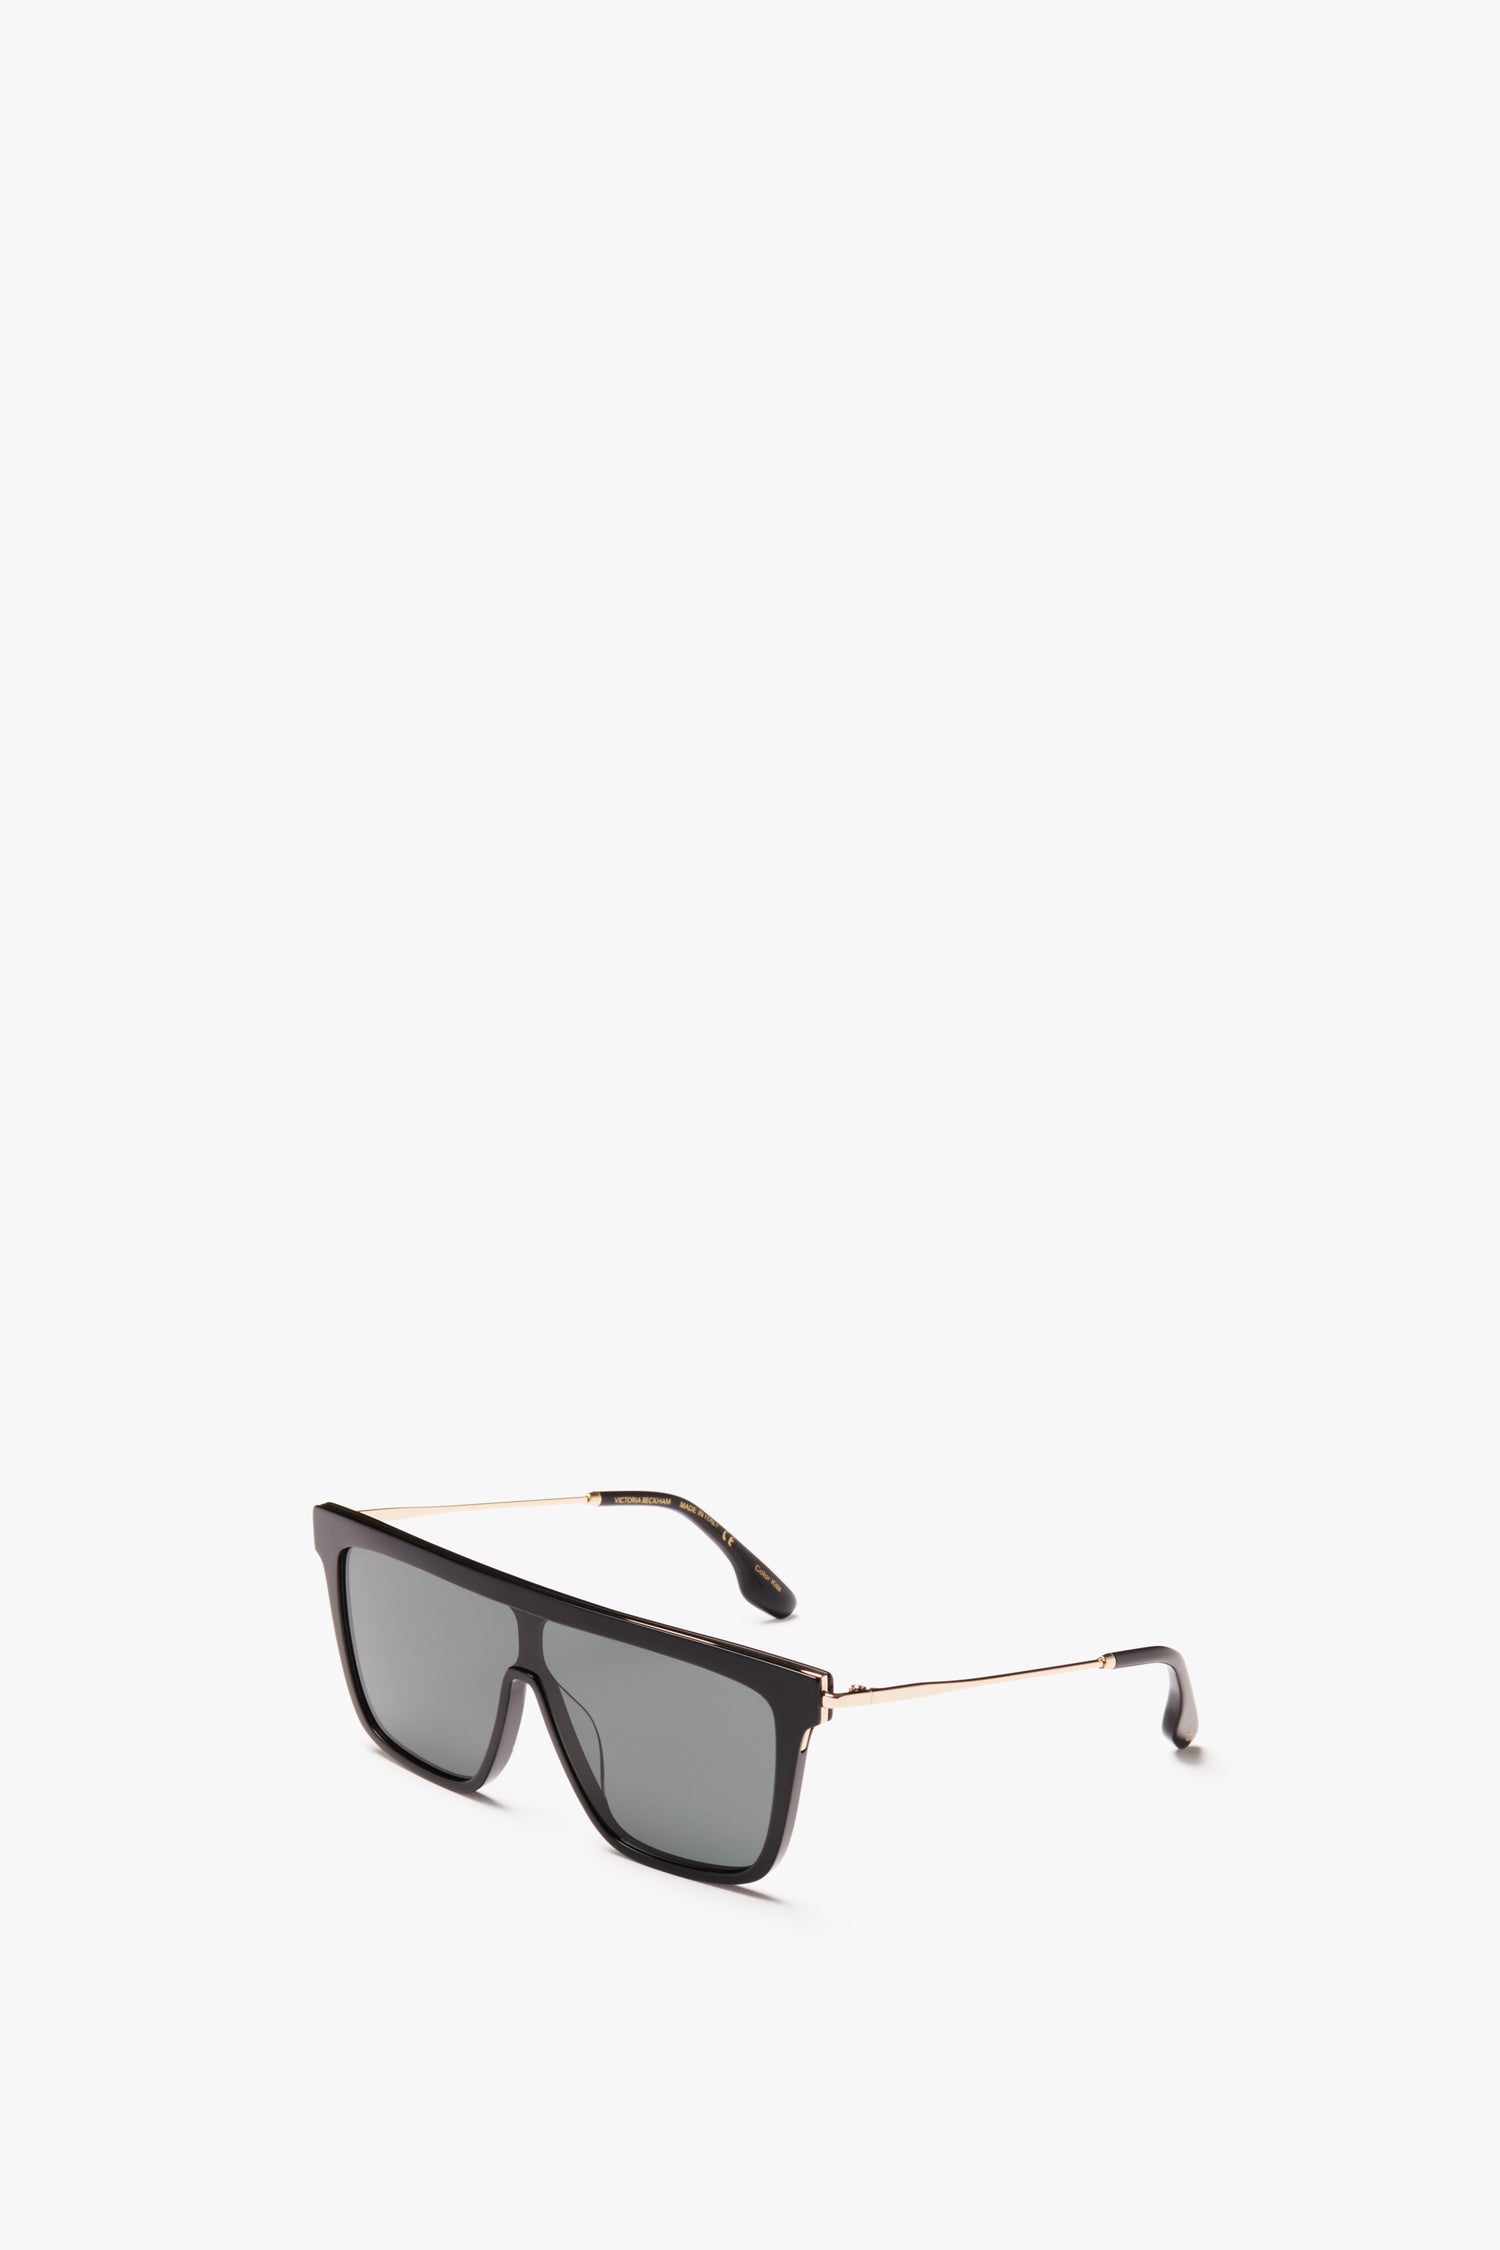 A pair of Victoria Beckham rectangular shield sunglasses in black, featuring a golden metal frame on a white background.